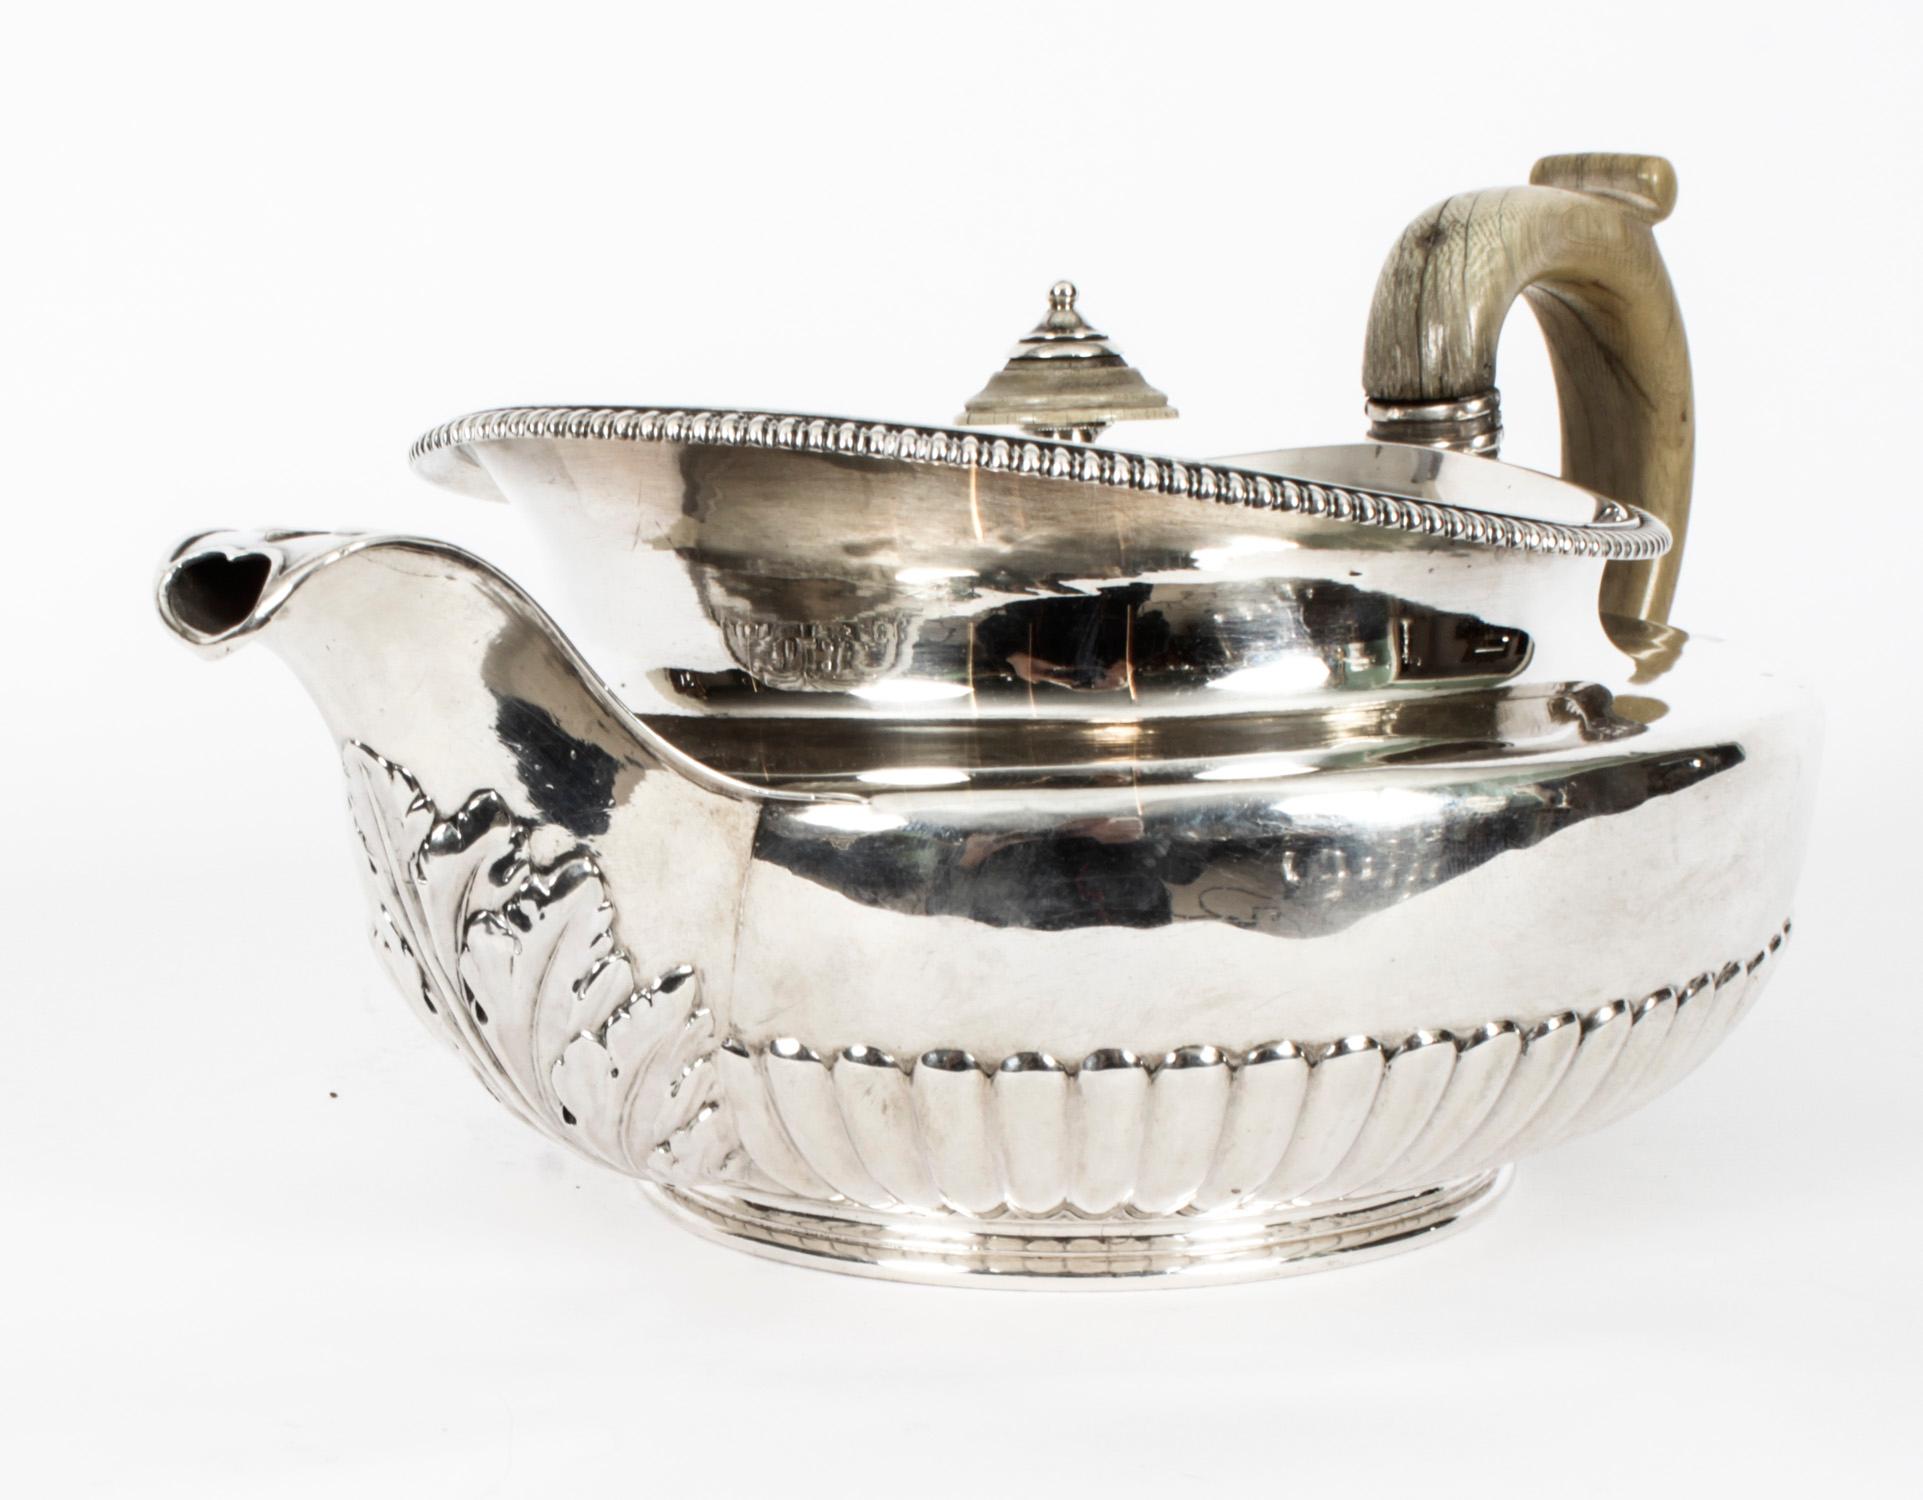 George III Antique Rare Georgian Sterling Silver Teapot by Paul Storr 1817, 19th Century For Sale